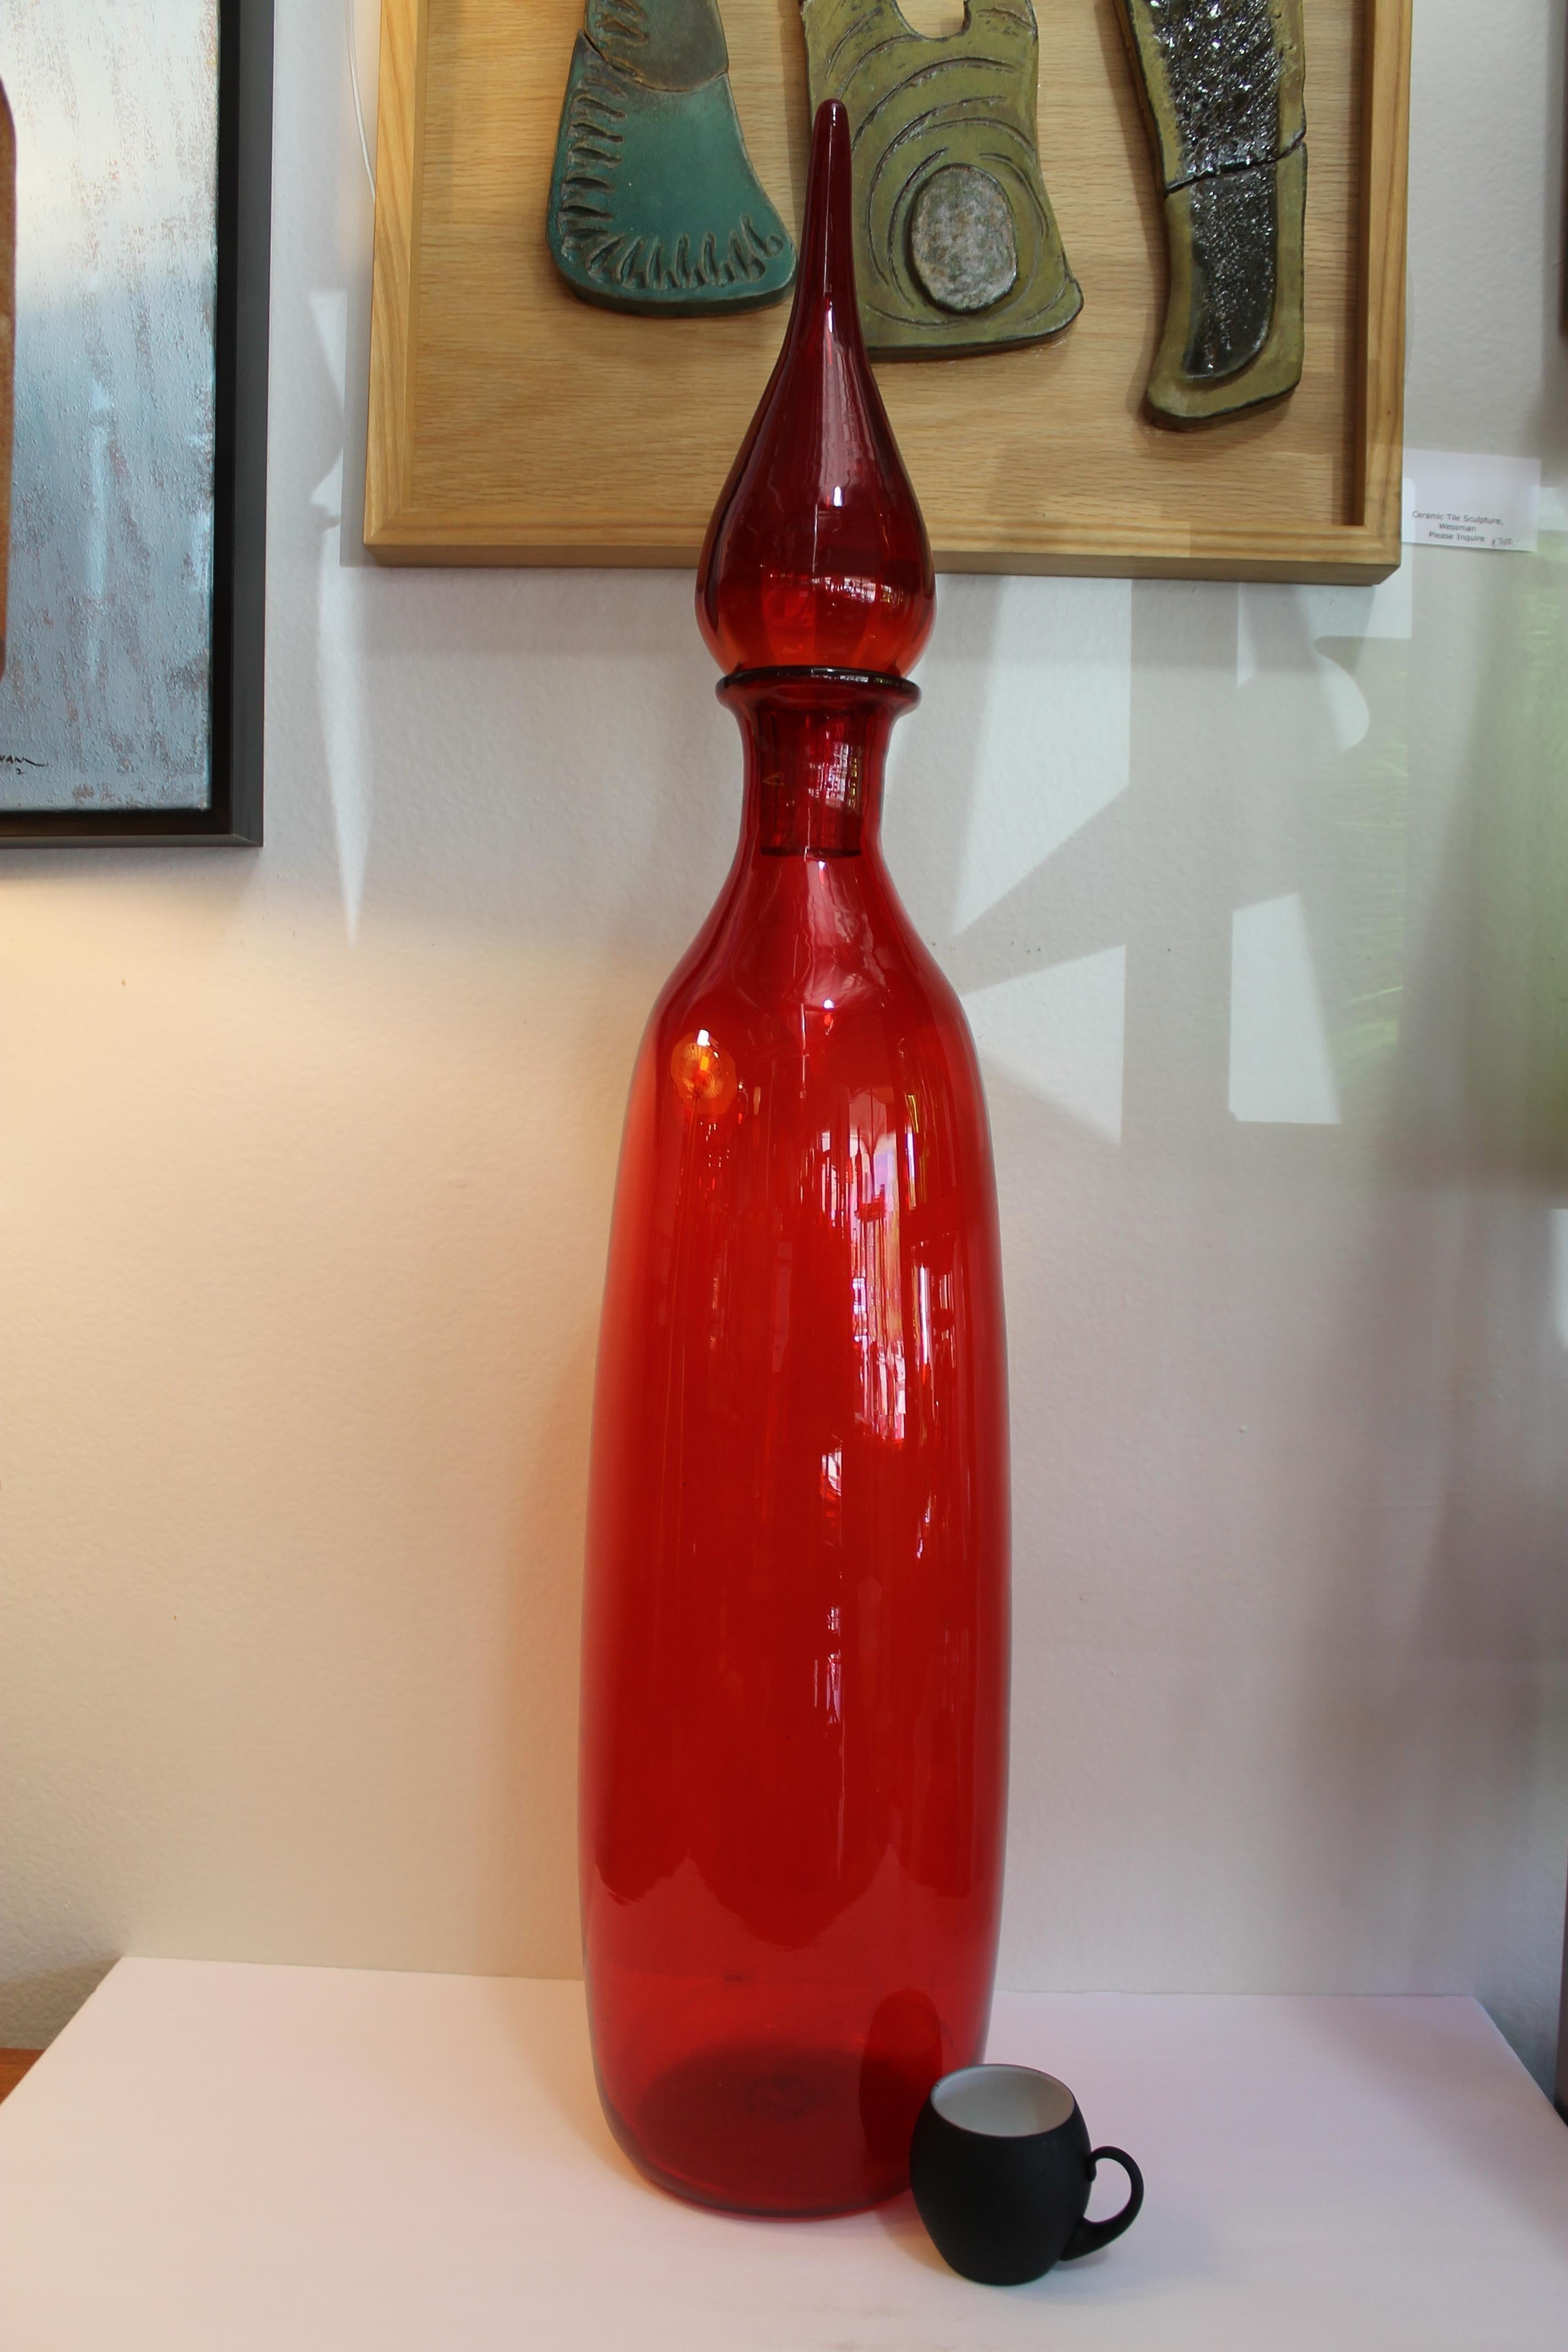 Large Blenko ruby red floor vessel/bottle with stopper by Wayne Husted. Bottle (without stopper) is 26.5